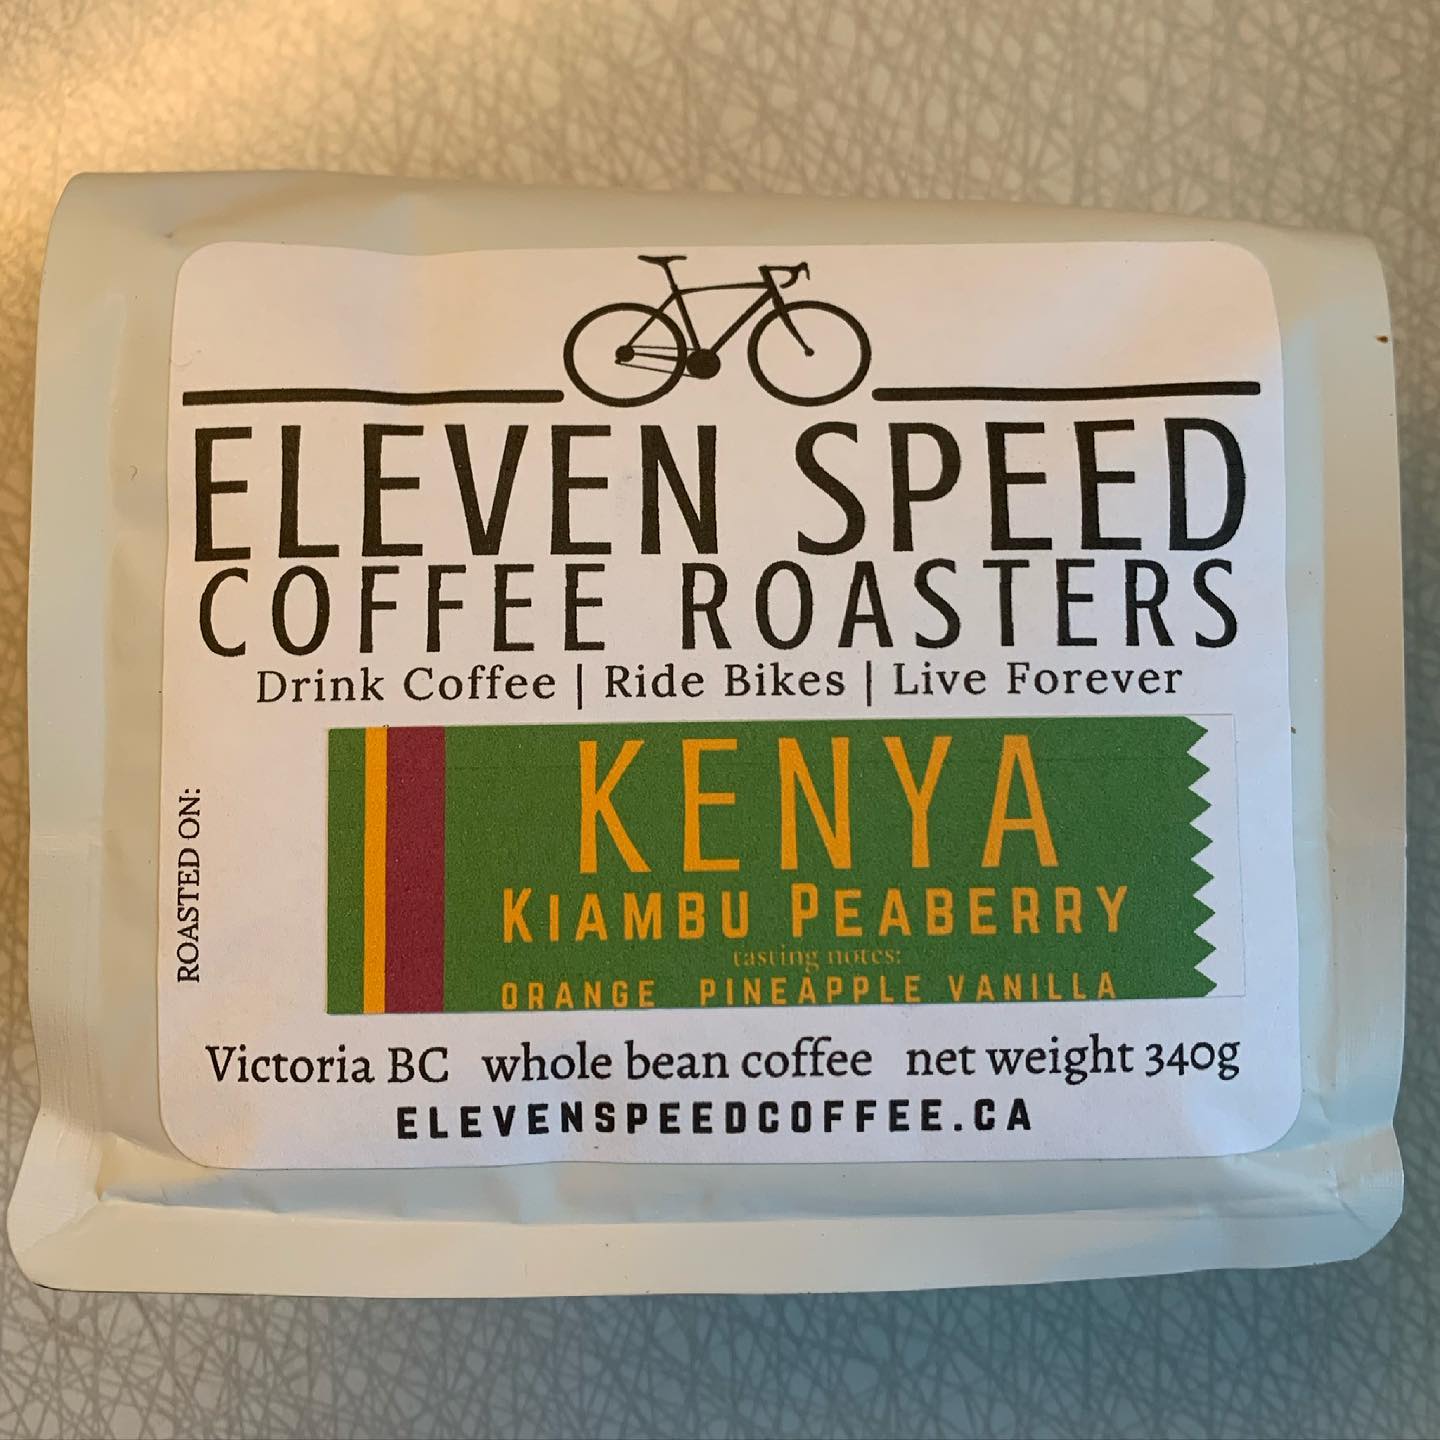 This was delivered last week and I’ve been looking forward to it. Today I cracked it open and it did not disappoint! So good. #yyjcoffee #coffee